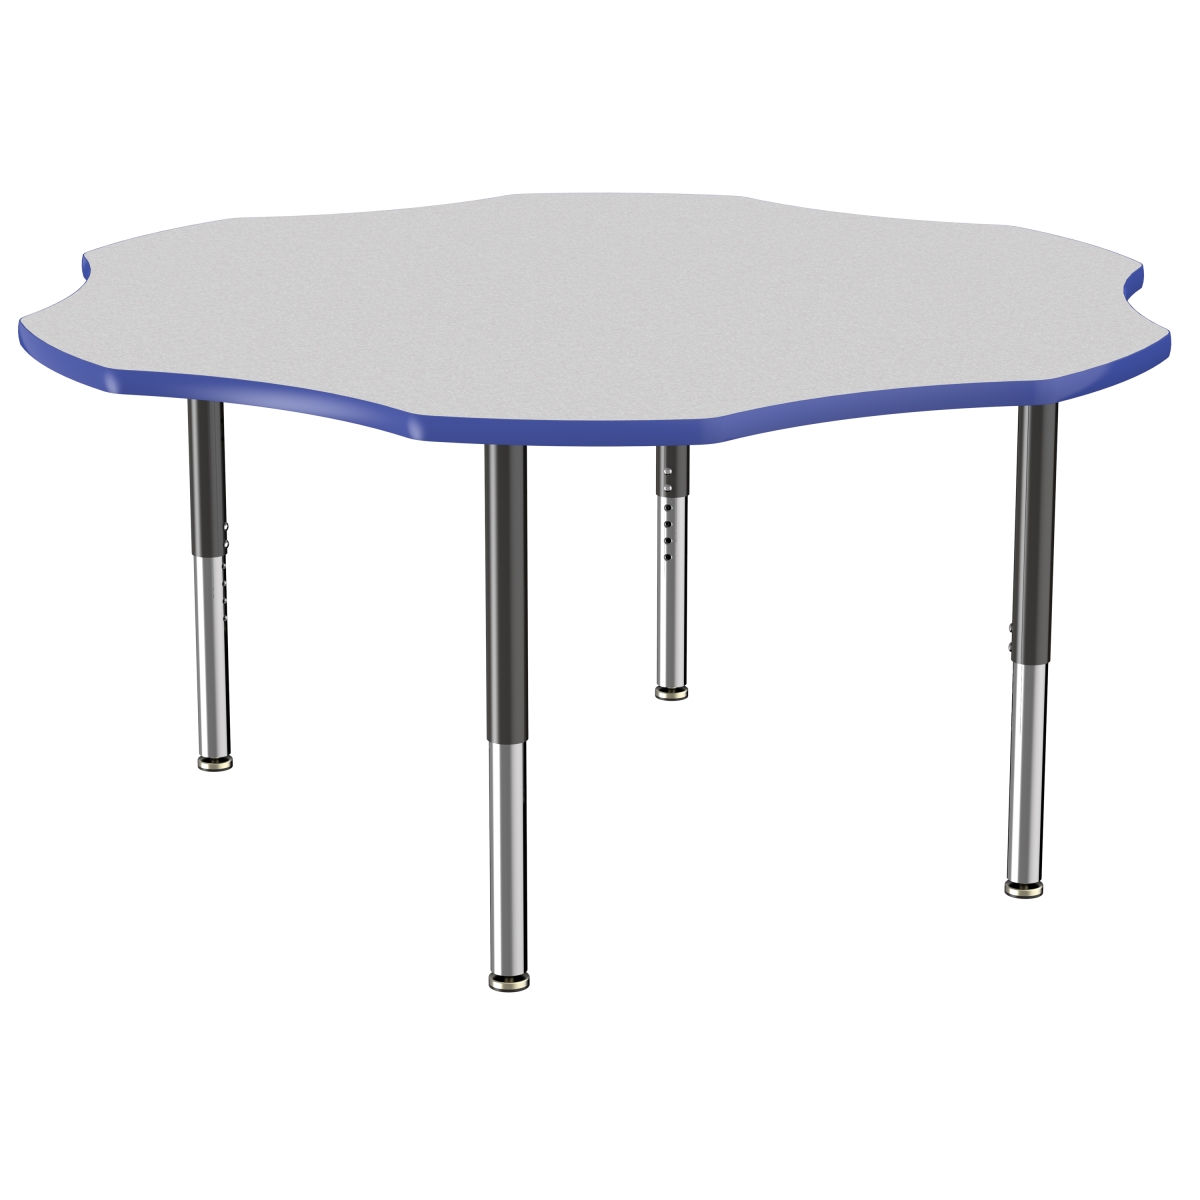 10092-gybl 60 In. Flower T-mold Adjustable Activity Table With Super Leg - Grey & Blue